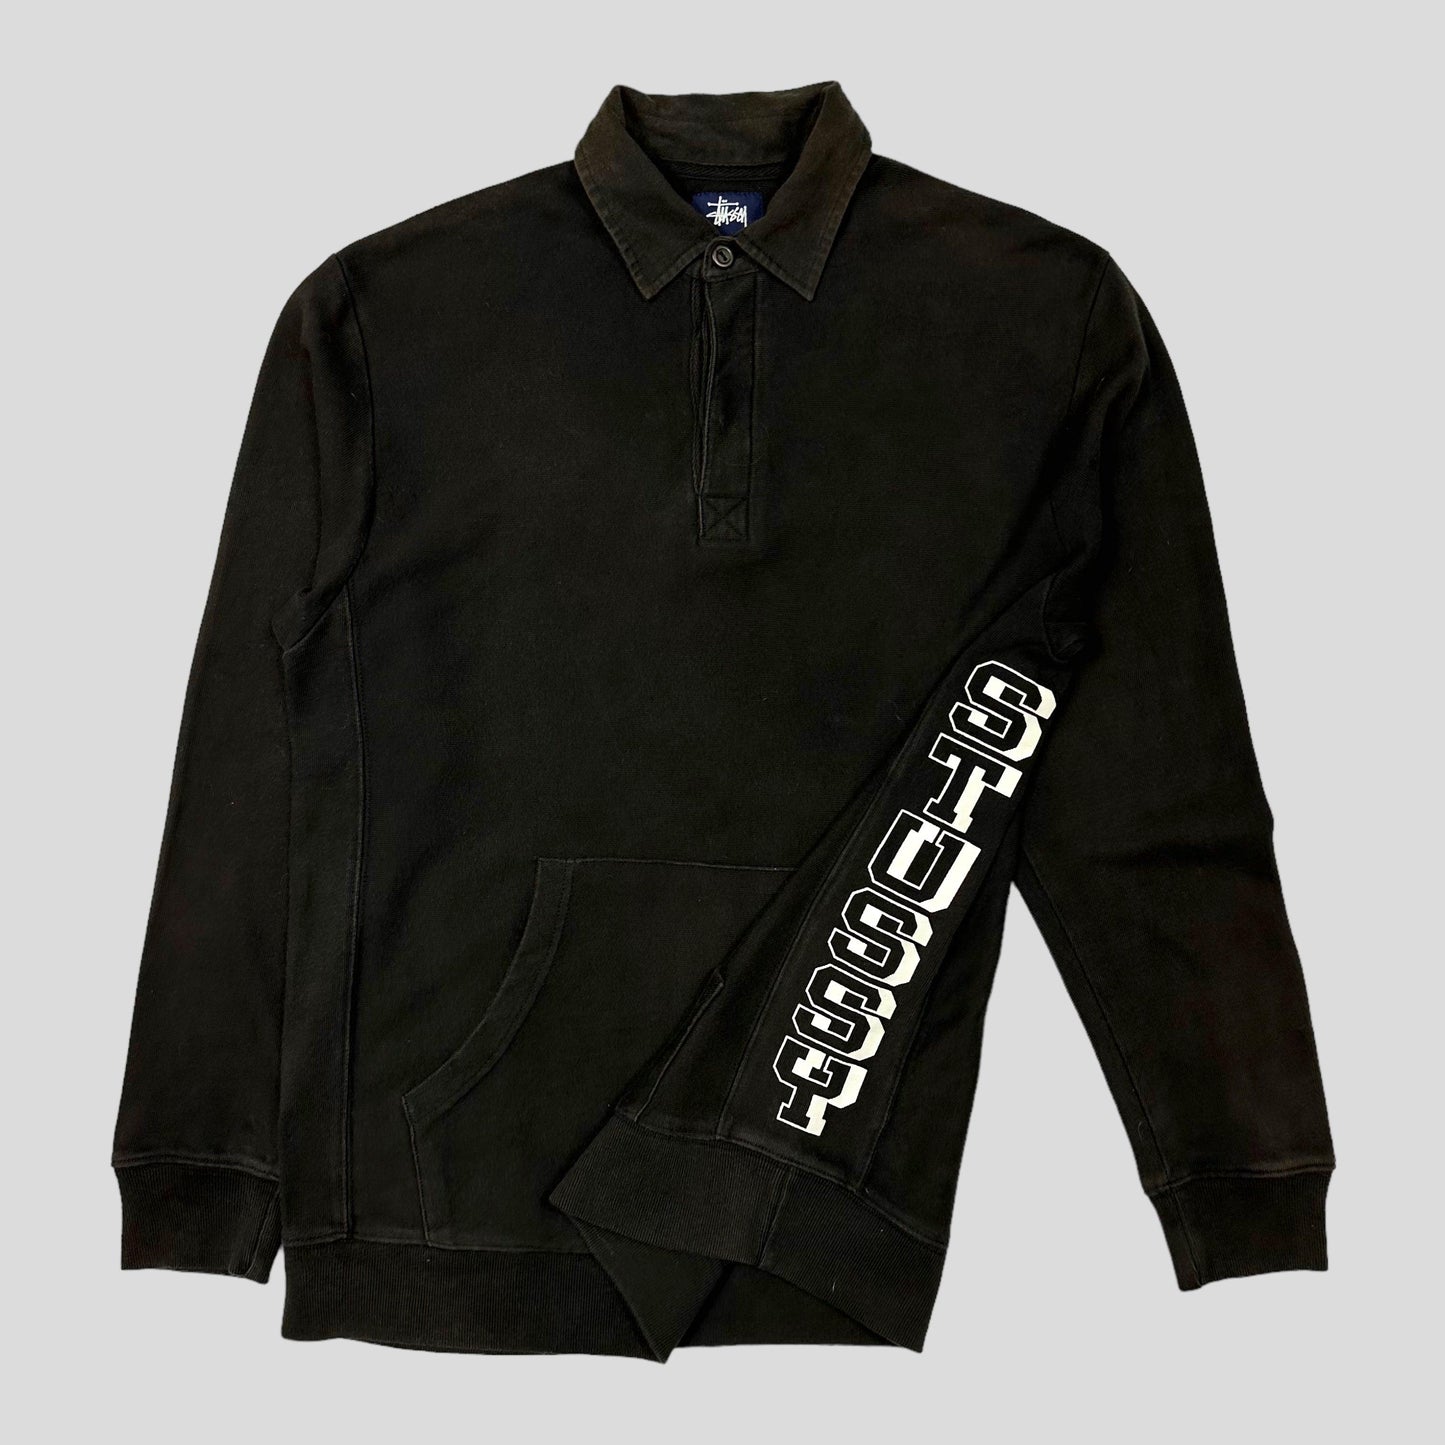 Stussy 90’s Rugby Spellout Jumper - M - Known Source